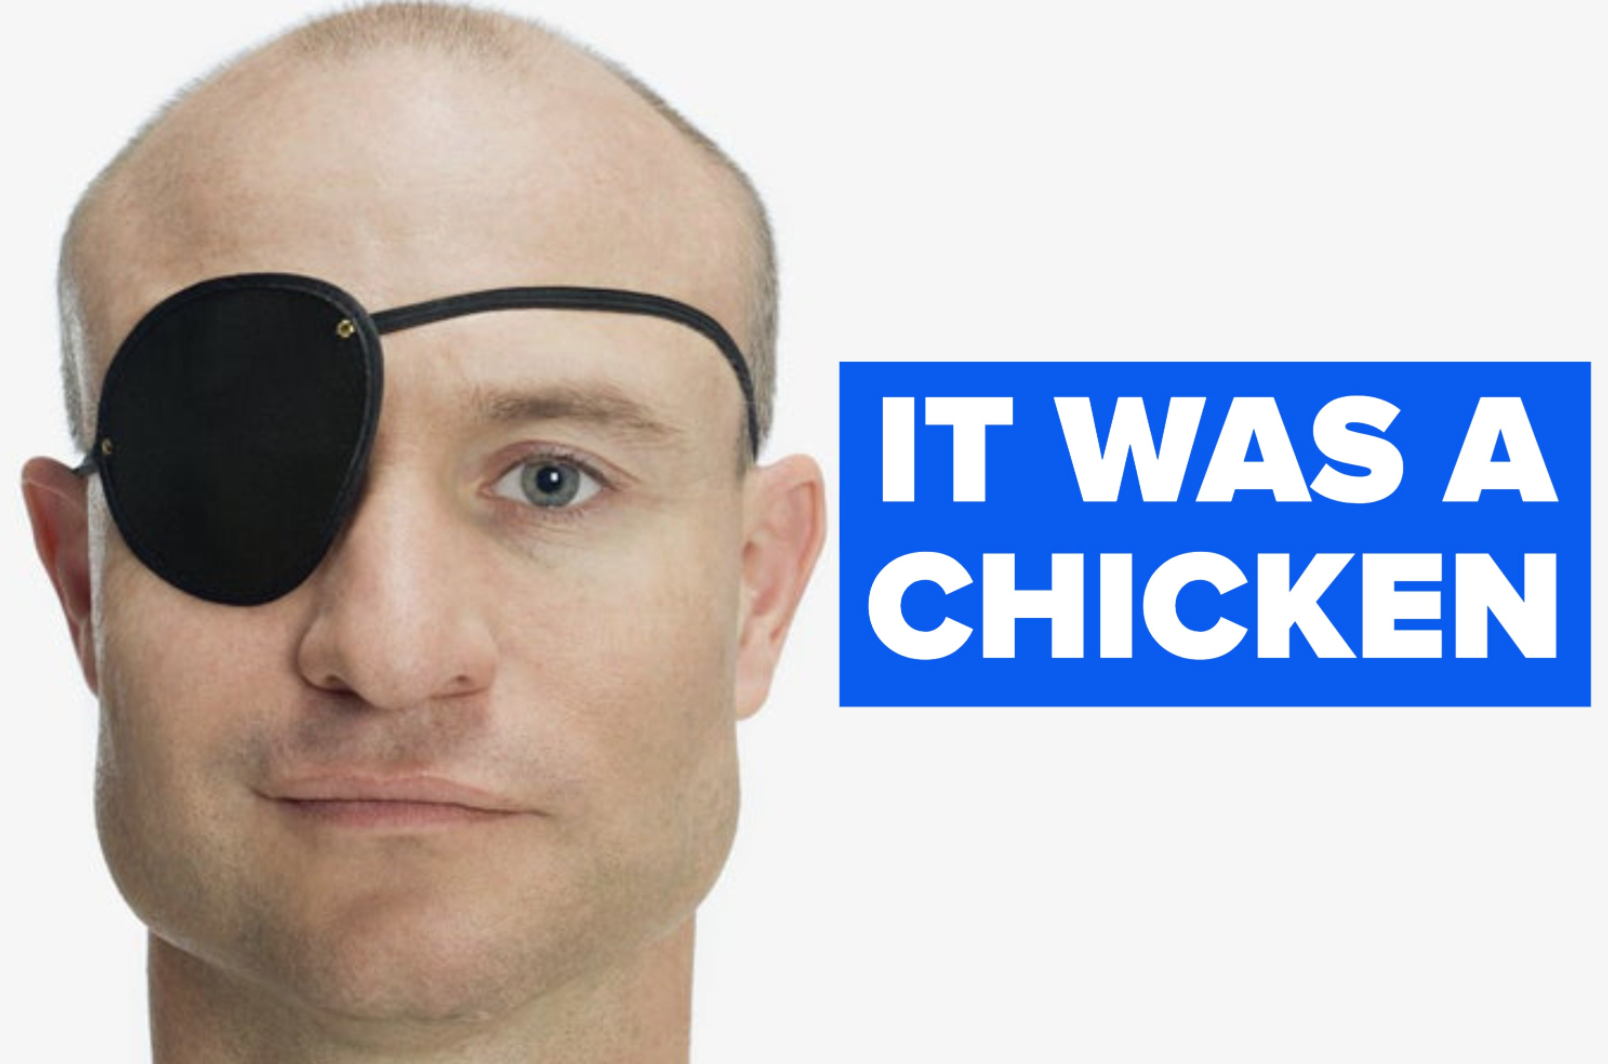 stock image of a man with eye patch